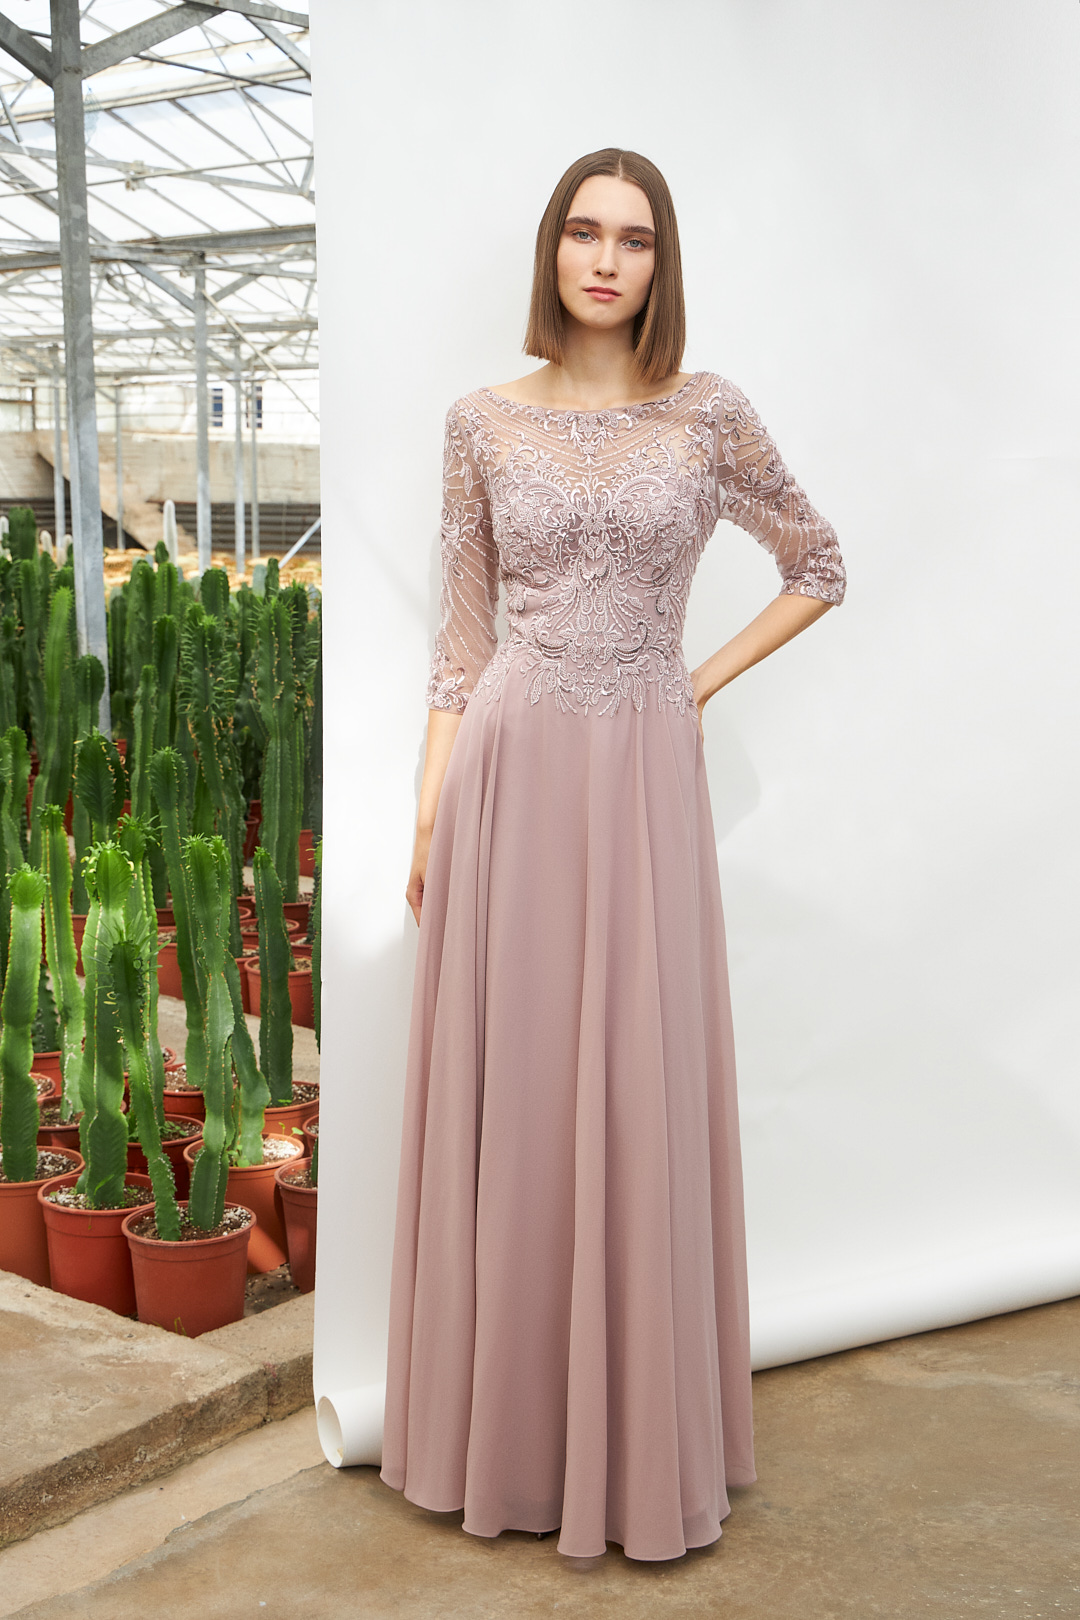 Classic Dresses / Long classic chiffon dress with beaded top and sleeves